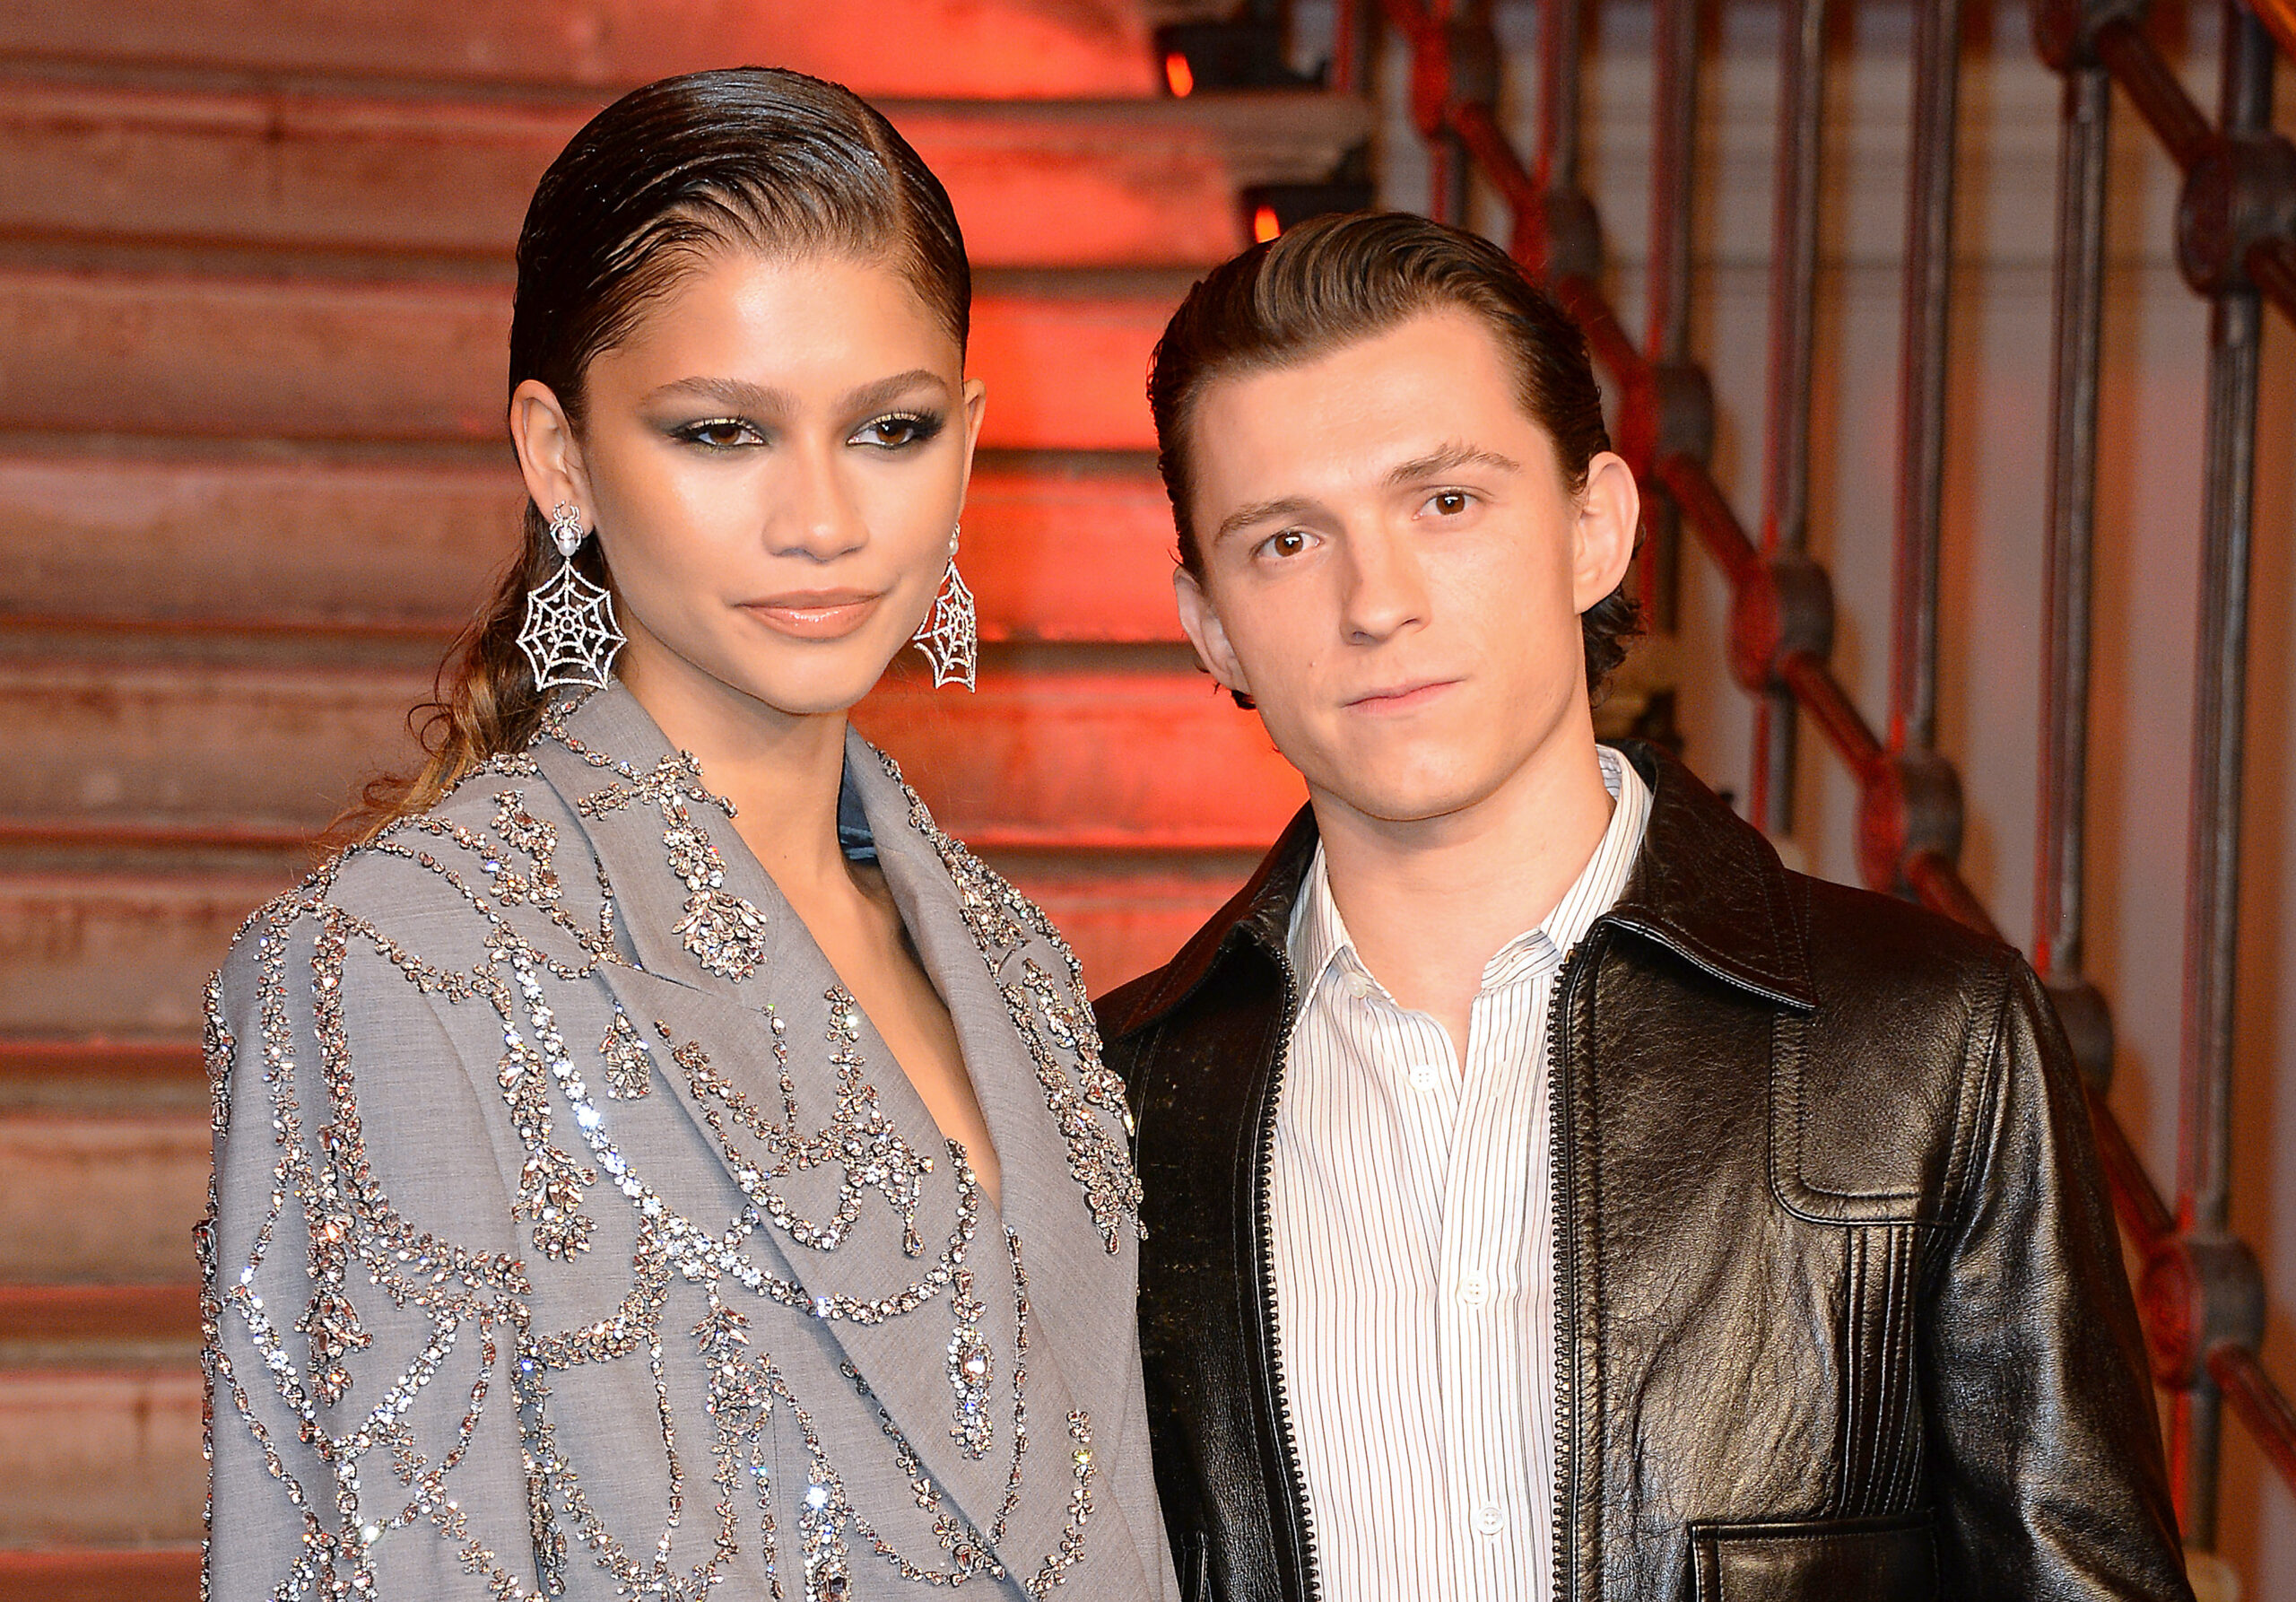 Tom Holland Says He And Zendaya Felt ‘Robbed Of Privacy’ After One Romantic Moment Went Viral